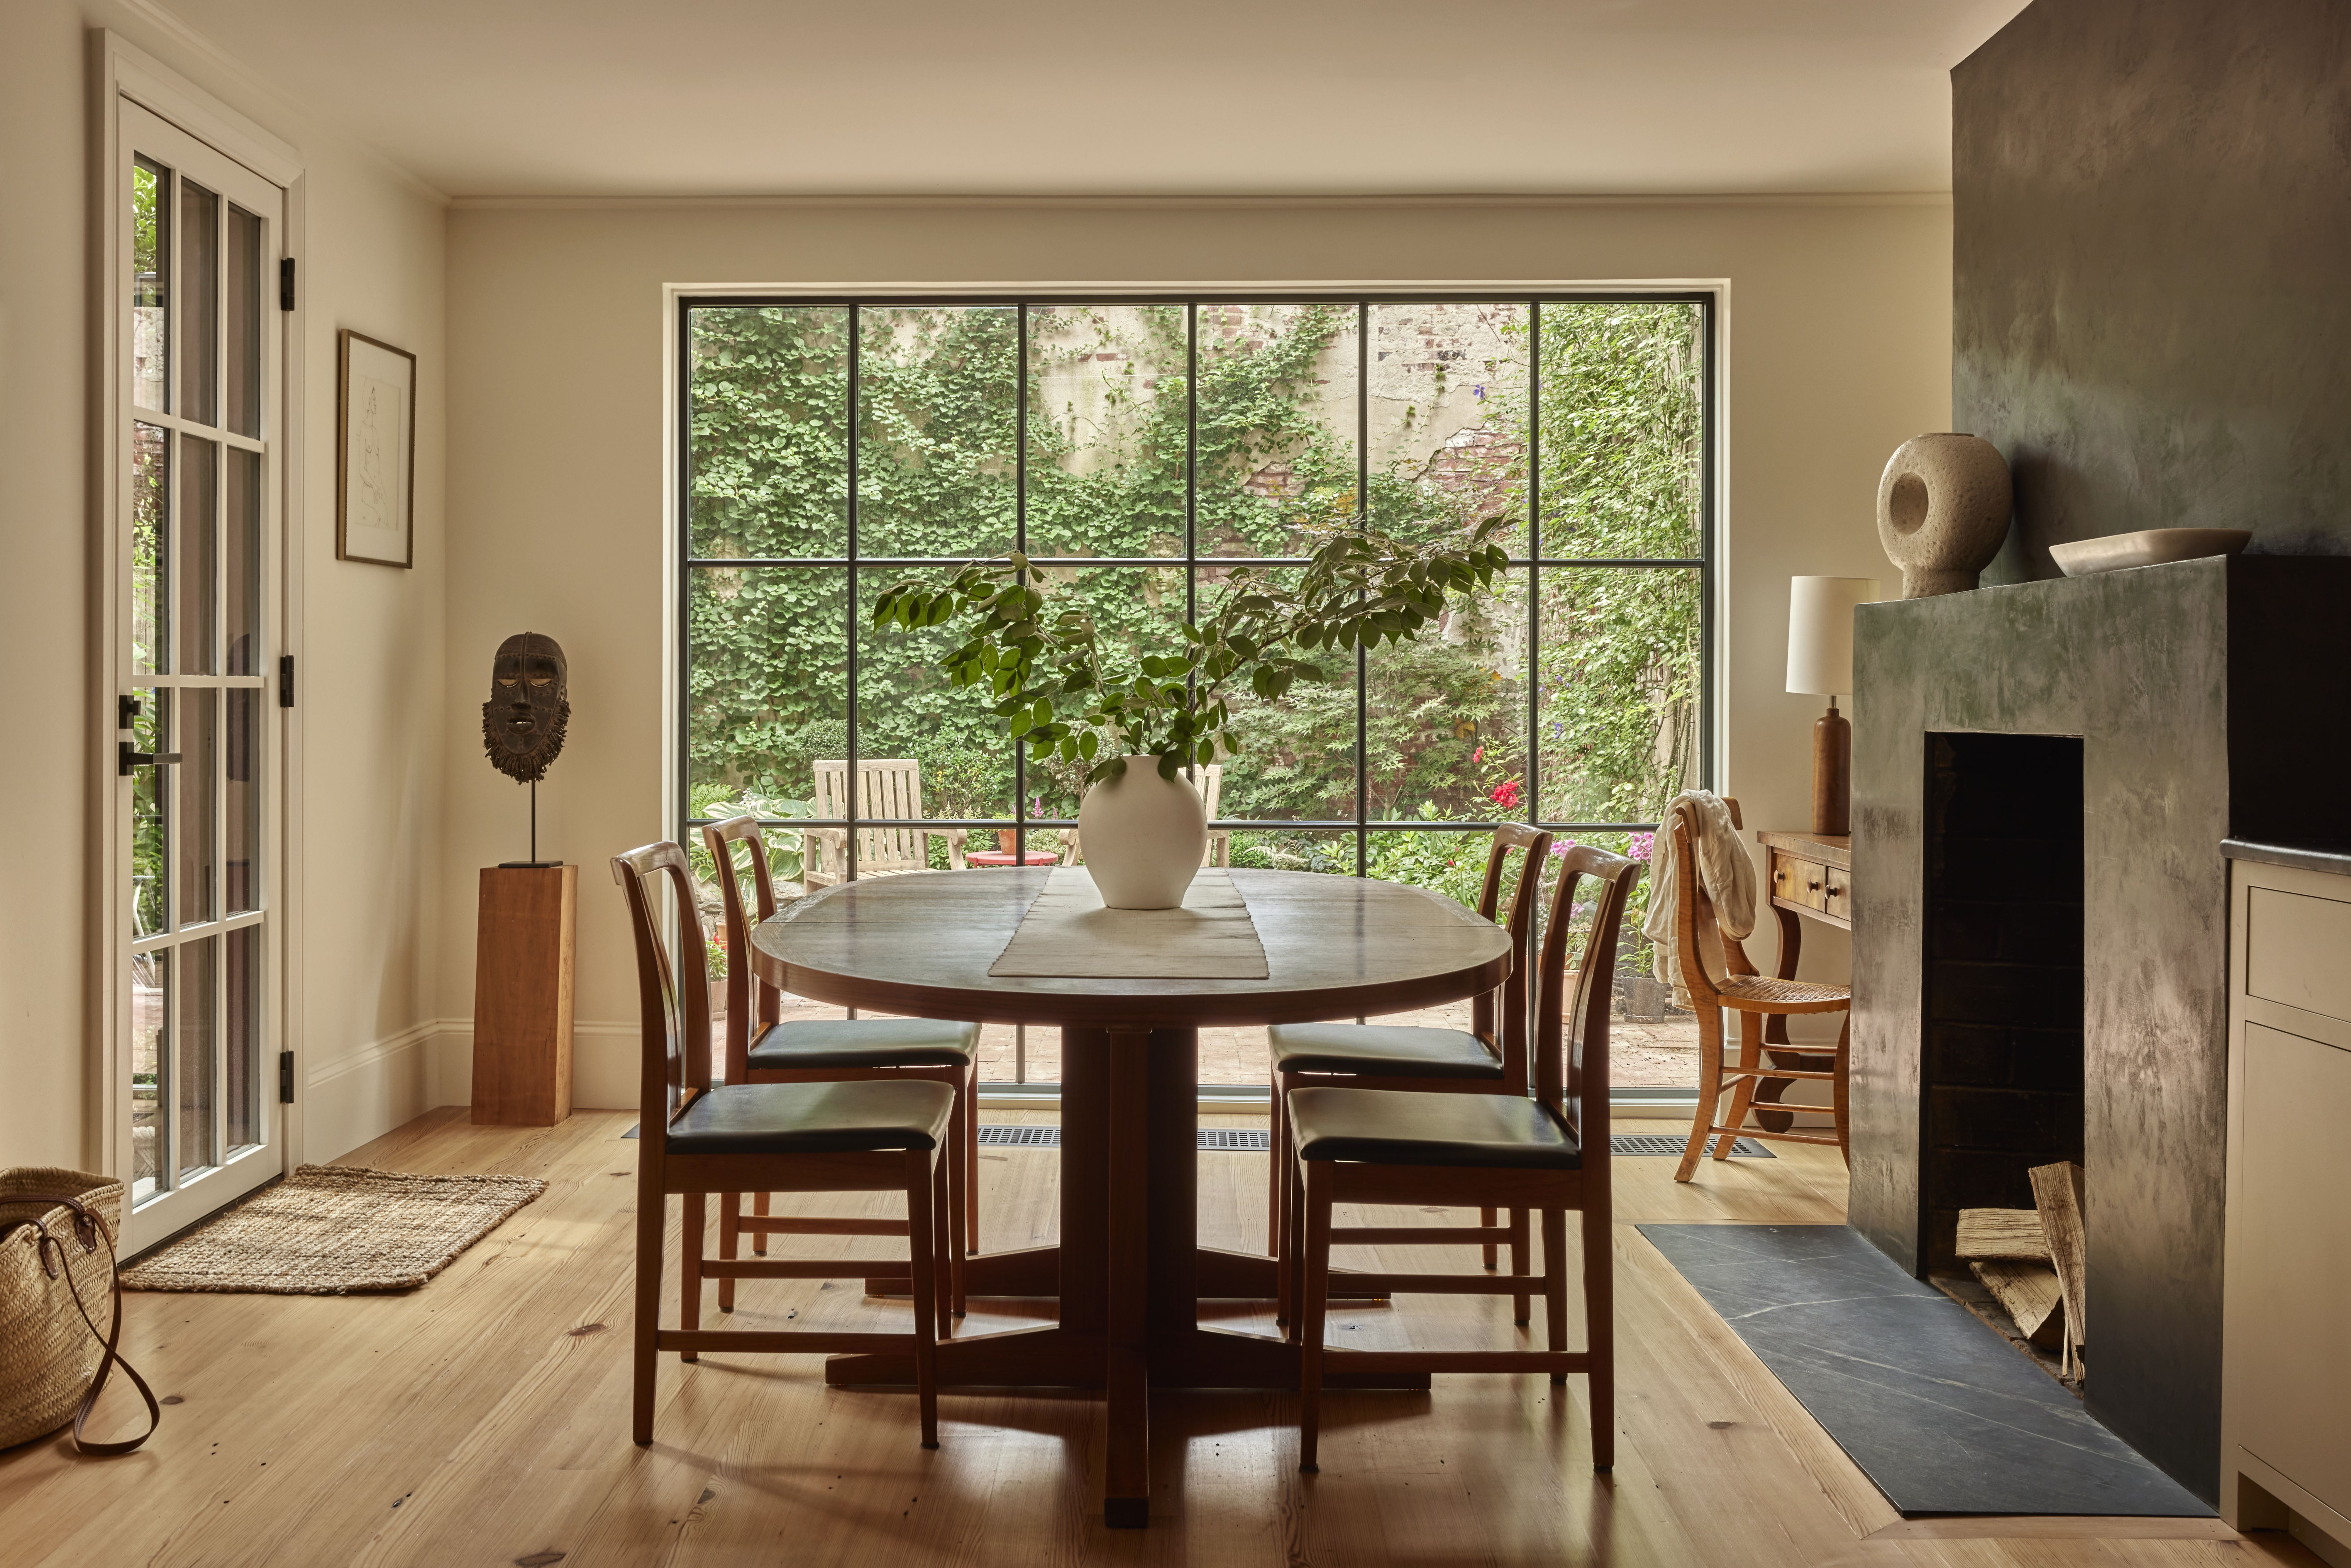 A dining room with large windows